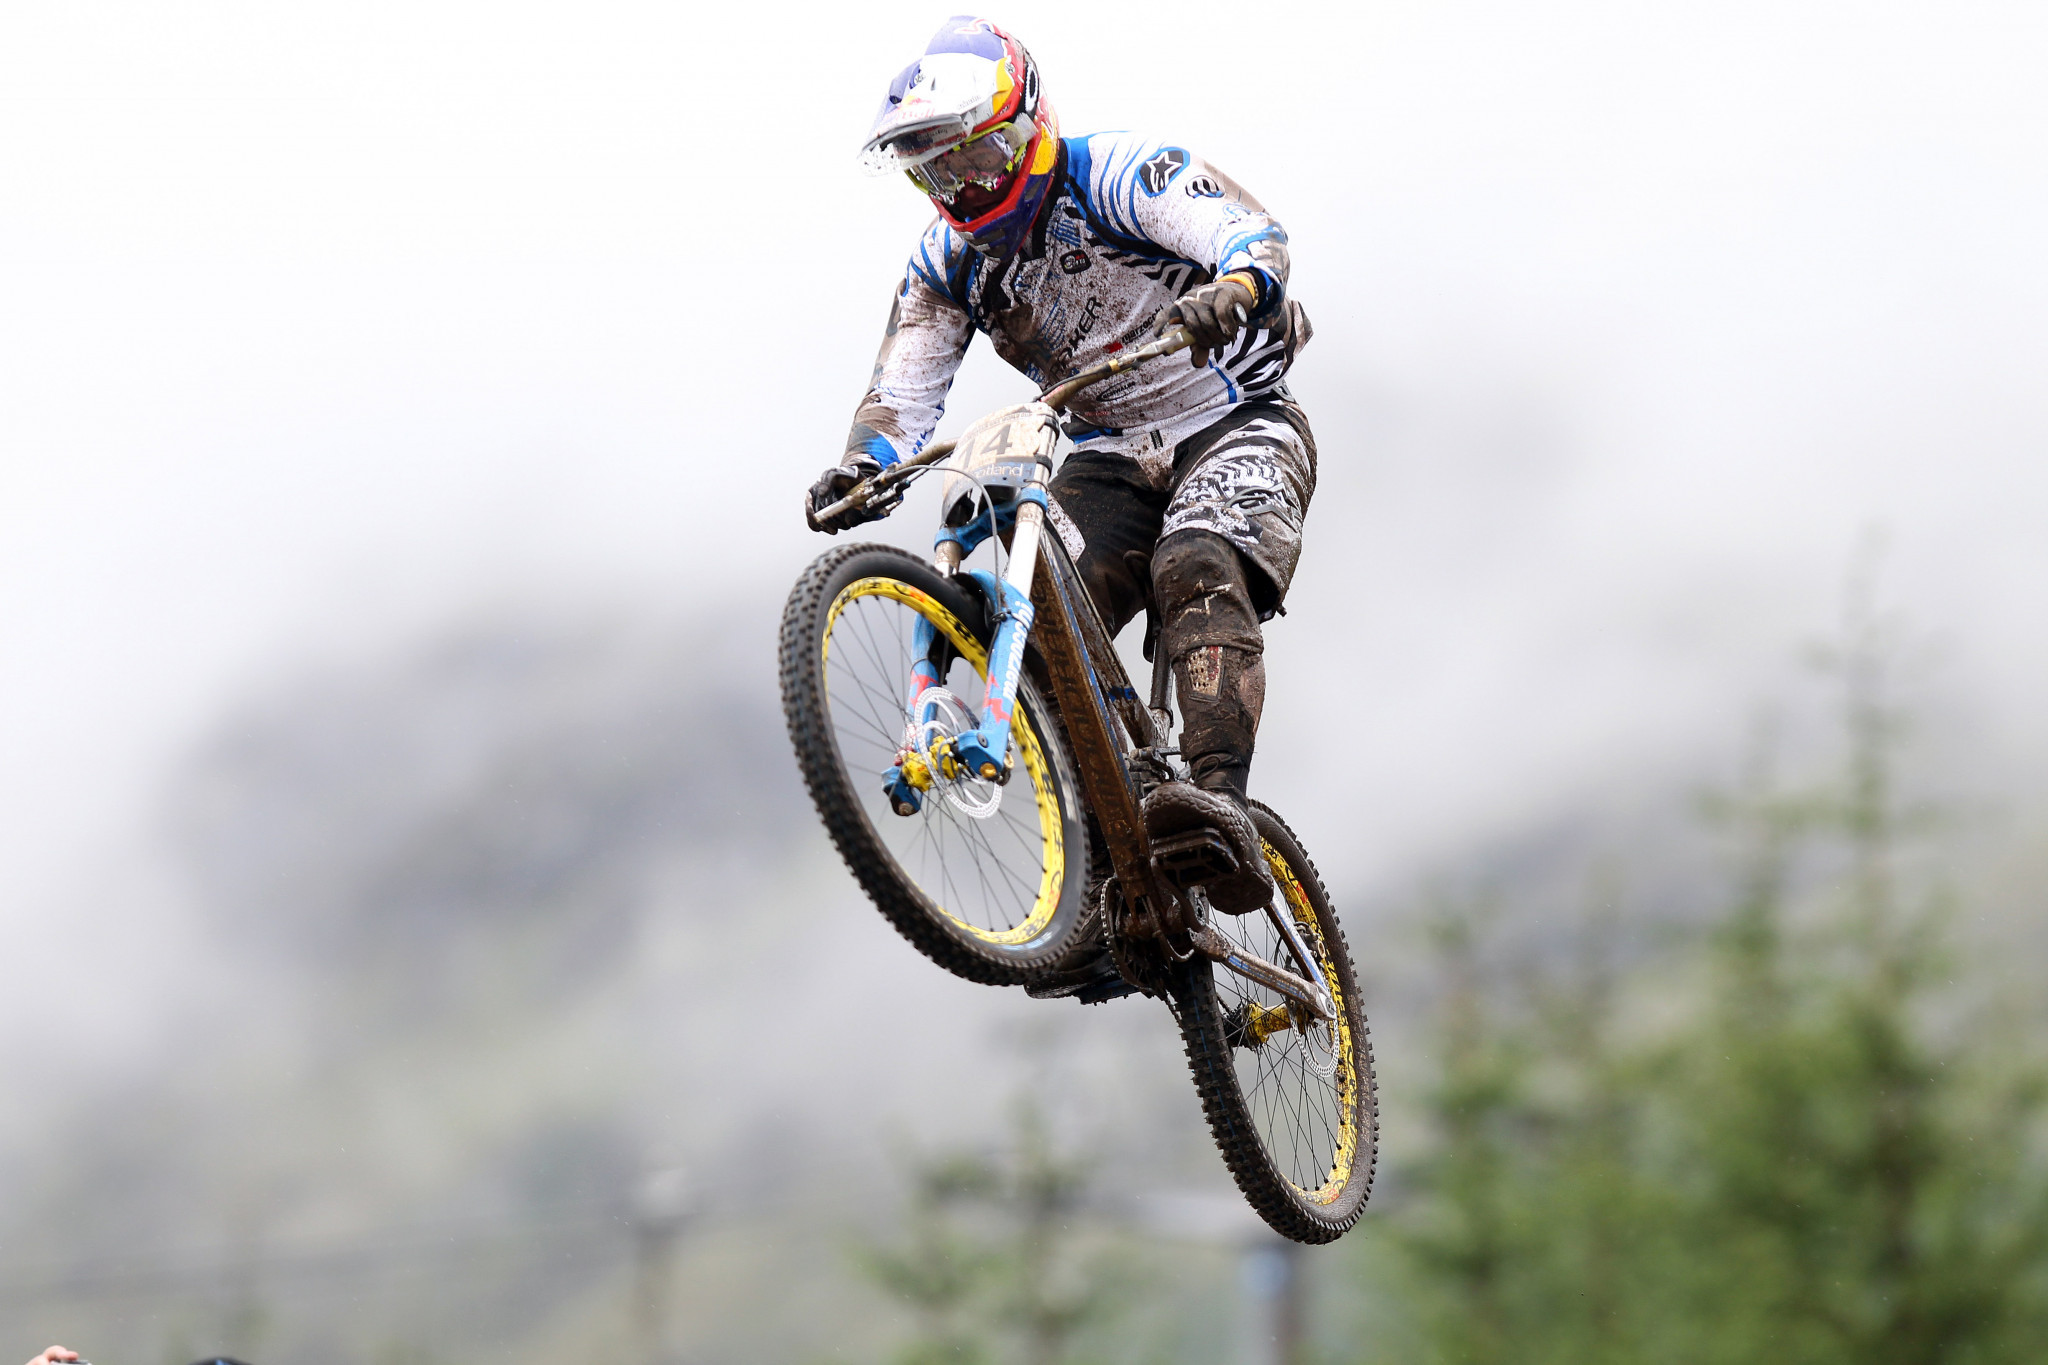 Haute-Savoie due to host historic event at UCI Mountain Bike World Cup